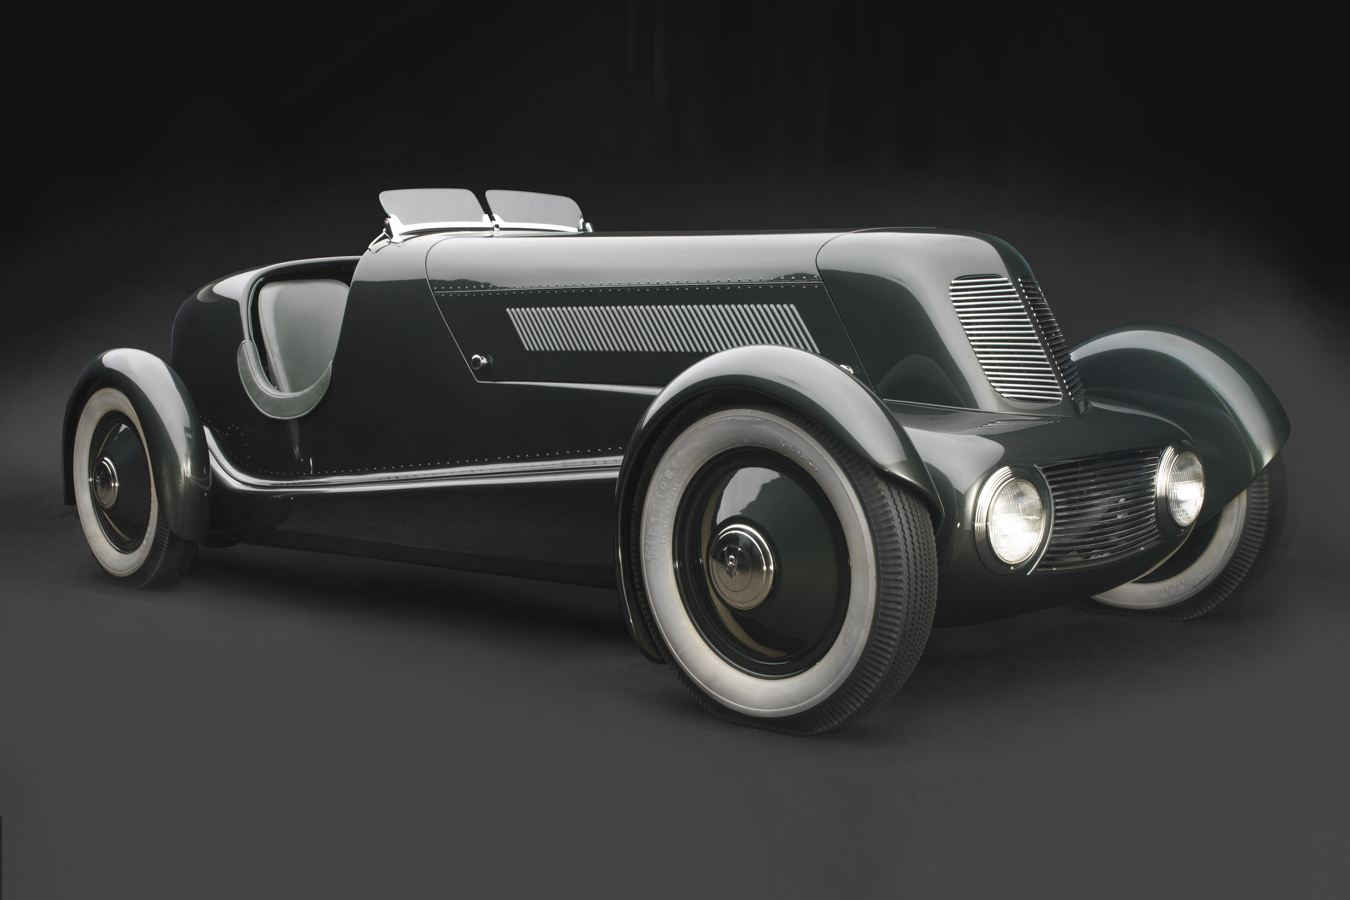 1934 Edsel Ford's Model 40 Special Speedster Backgrounds, Compatible - PC, Mobile, Gadgets| 1350x900 px